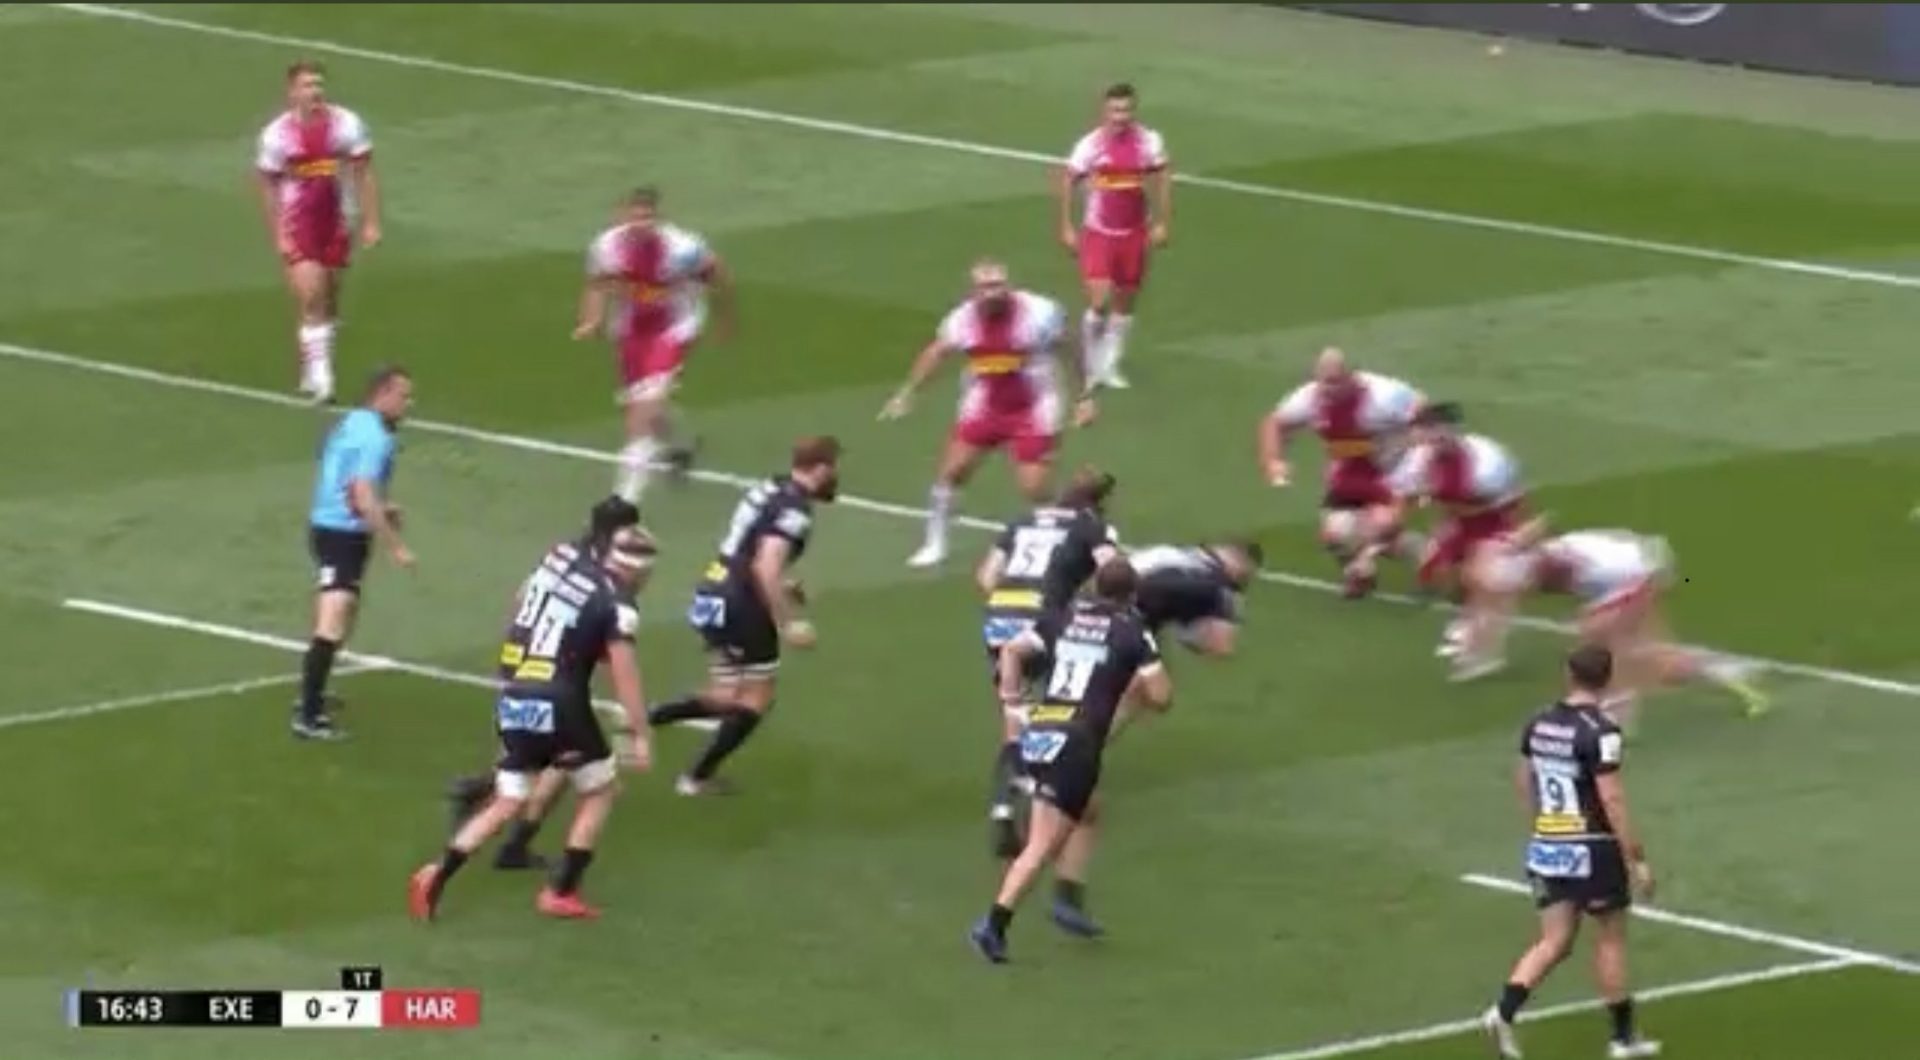 Insane defence by rookie shows he is made for Test rugby